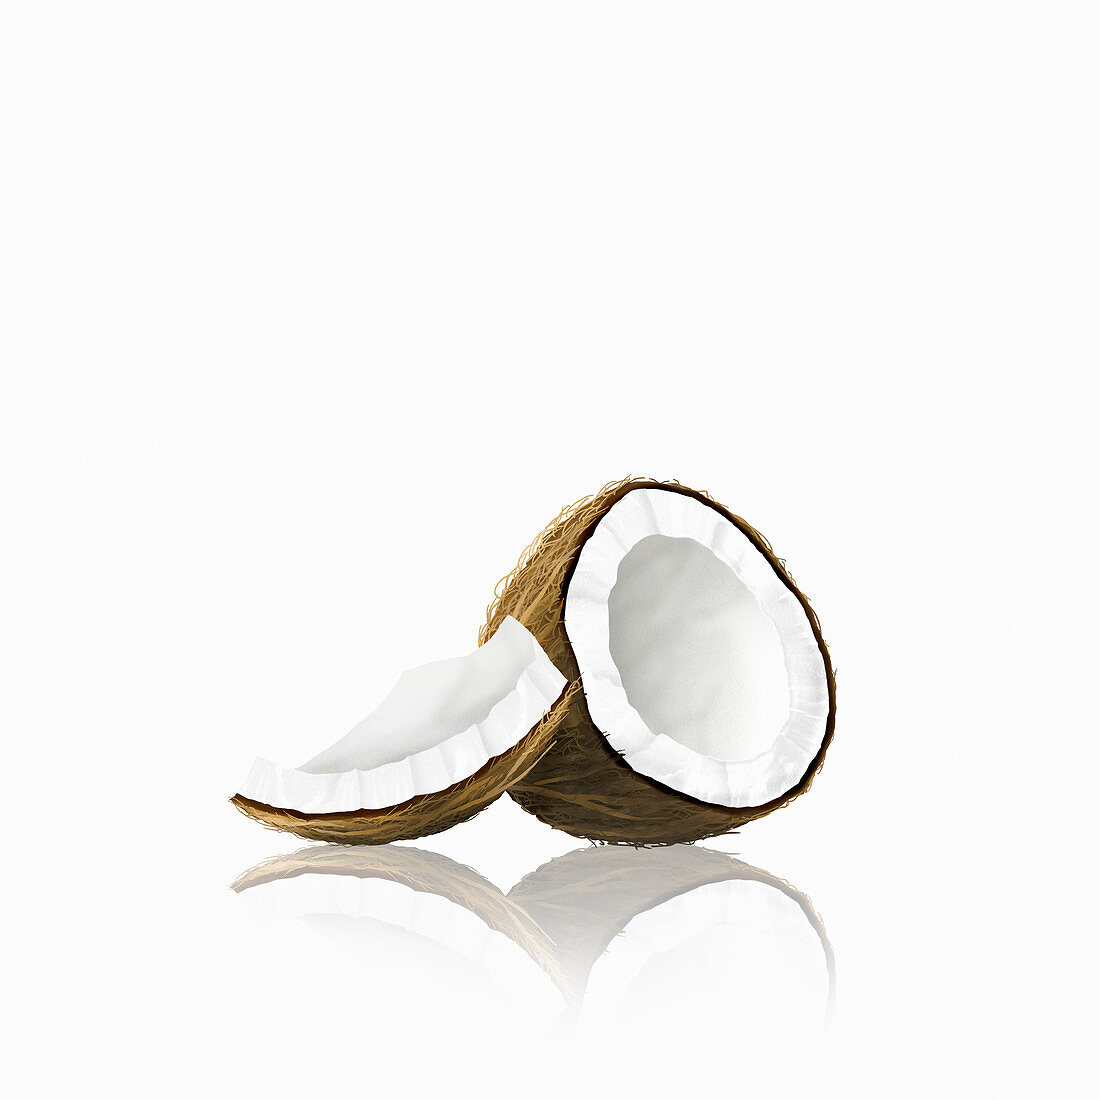 Pieces of coconut, illustration